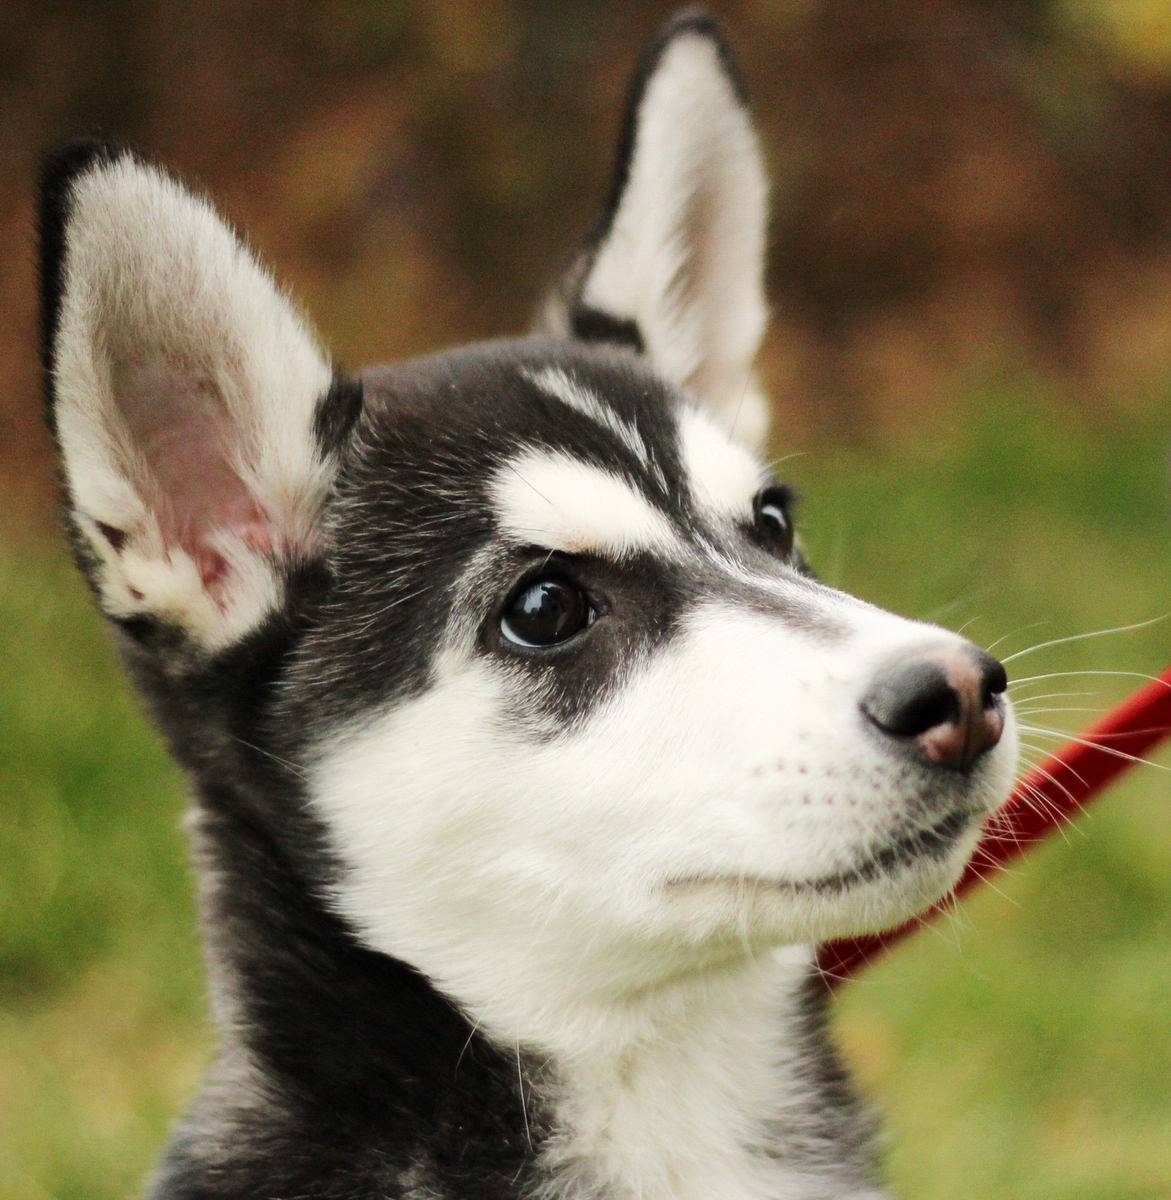 14 of the Cutest Crossbreed Dogs You’ll Want – #10 is Gorgeous!